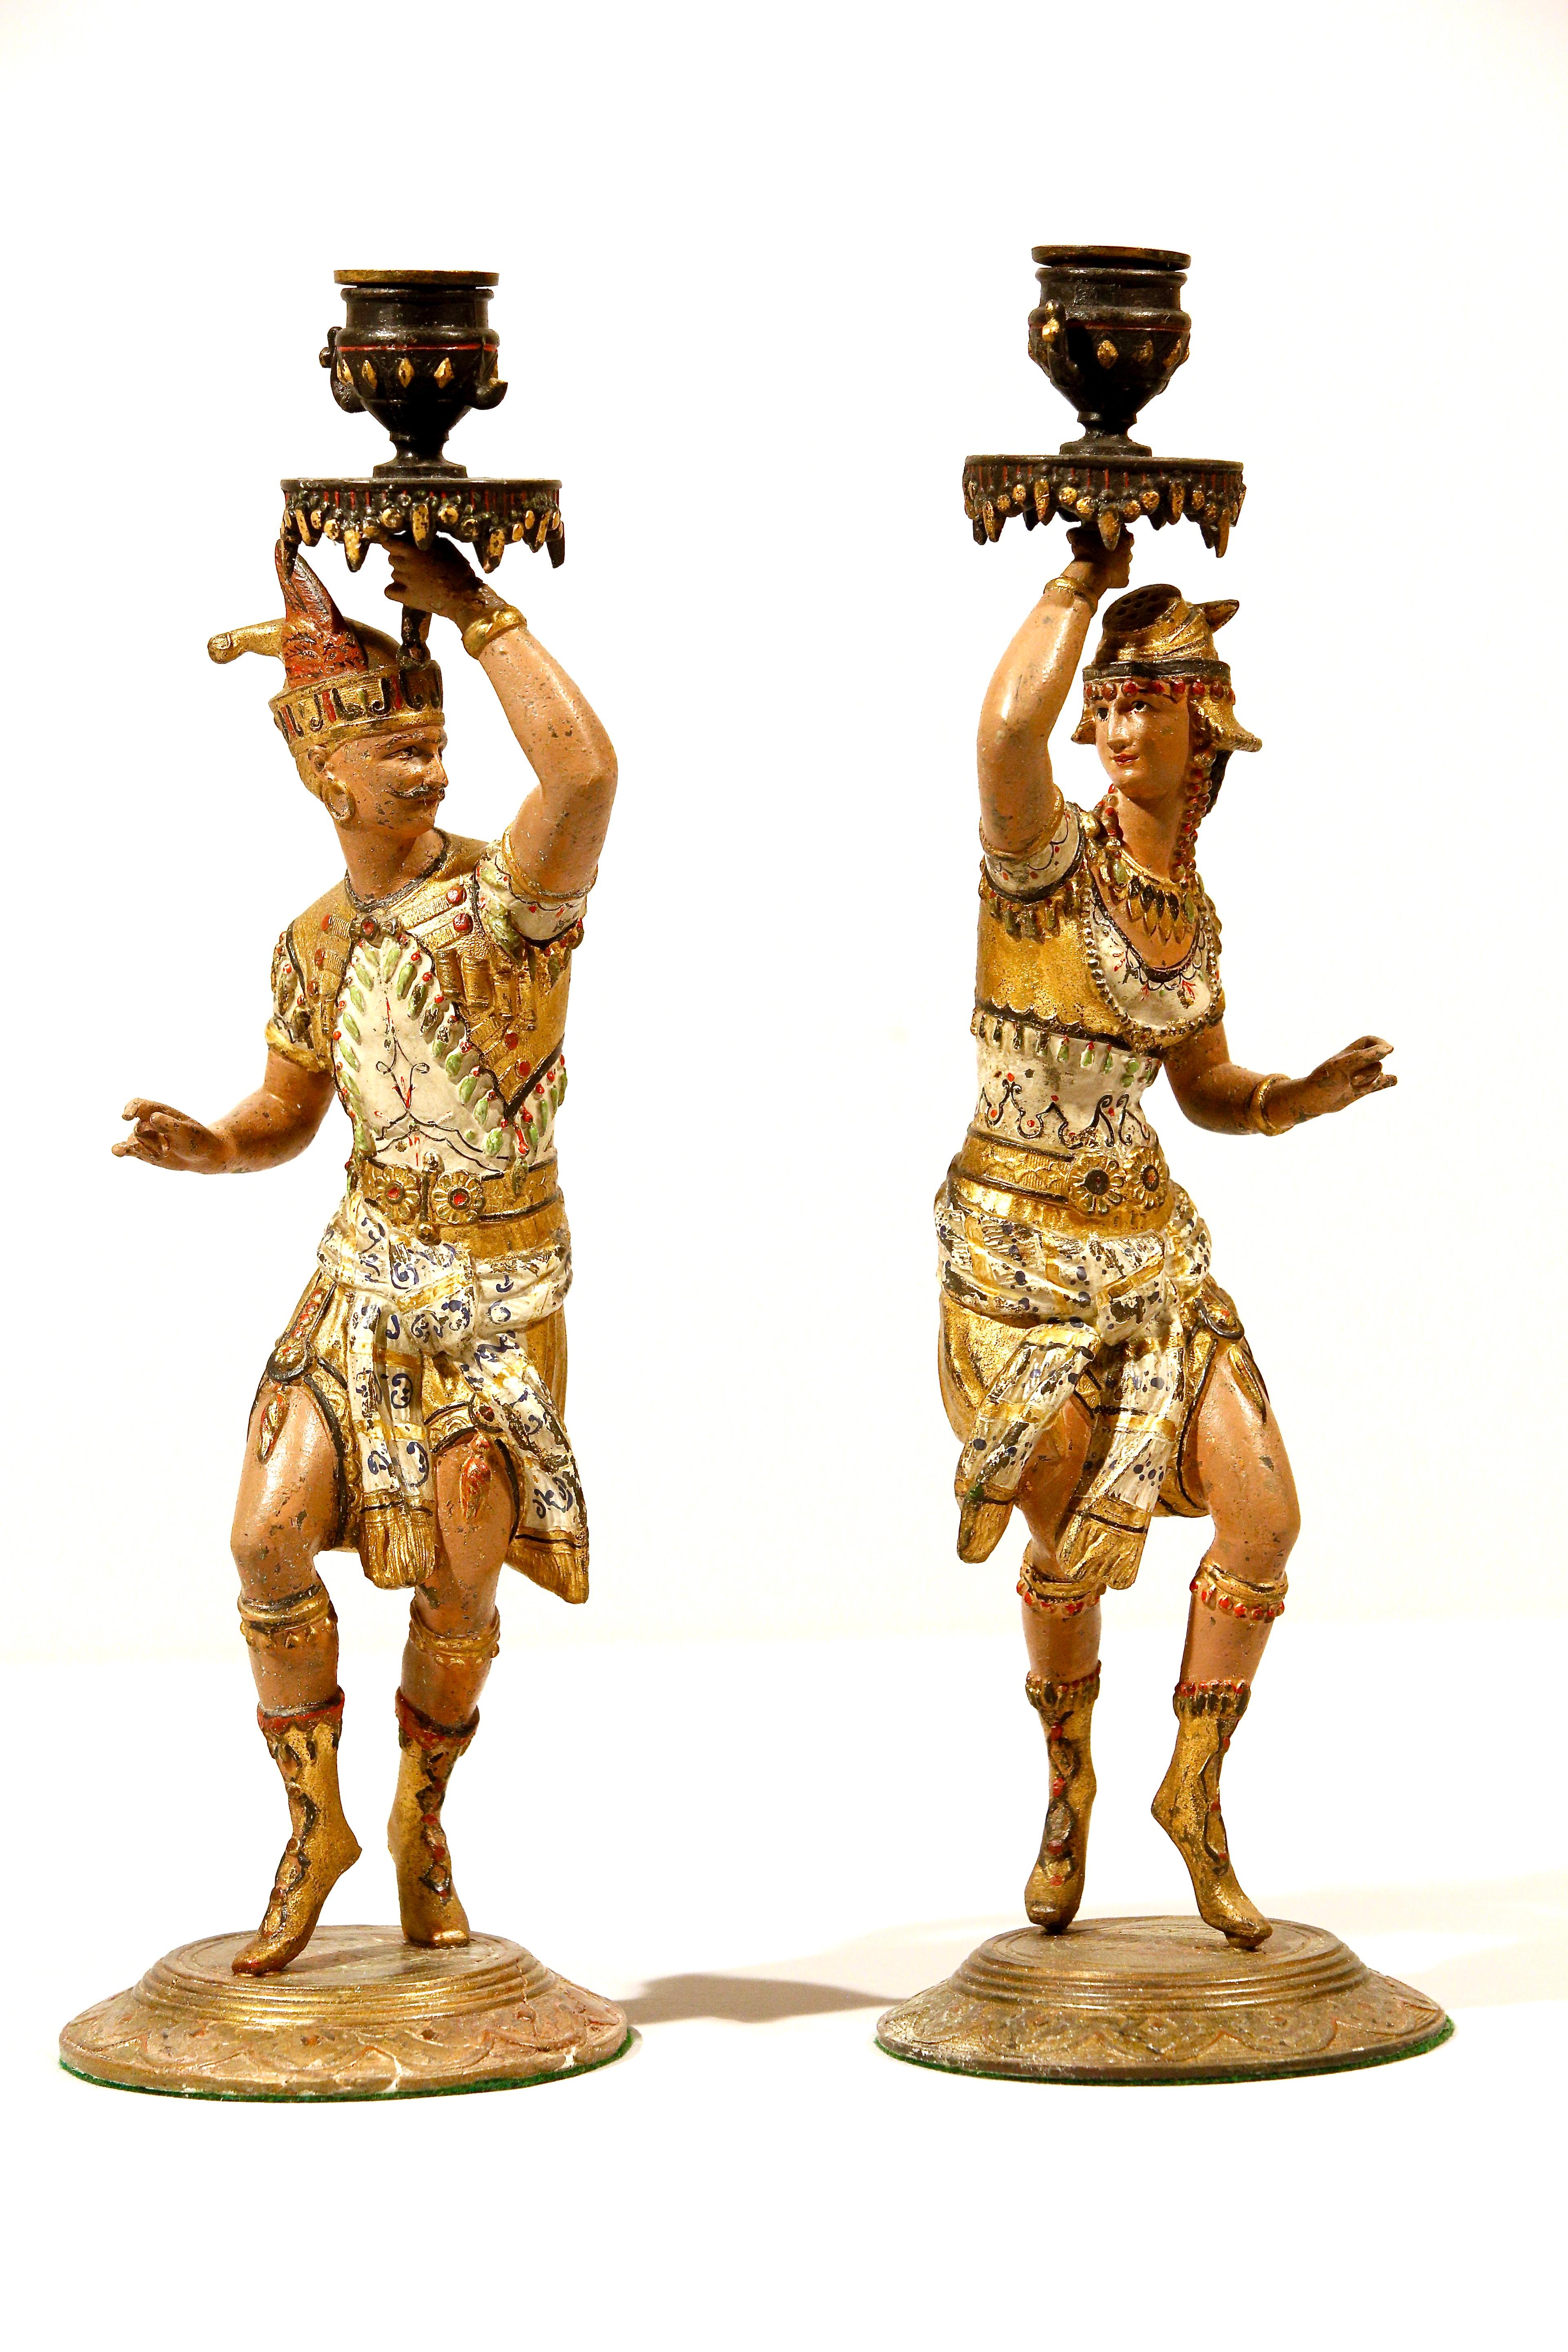 A pair of French cold painted spelter candlesticks modeled as a male and female running torch bearers in gilt highlighted  Nubian costumes, original worn paint and natural patination holding a candle holder above their heads. 

Condition excellent